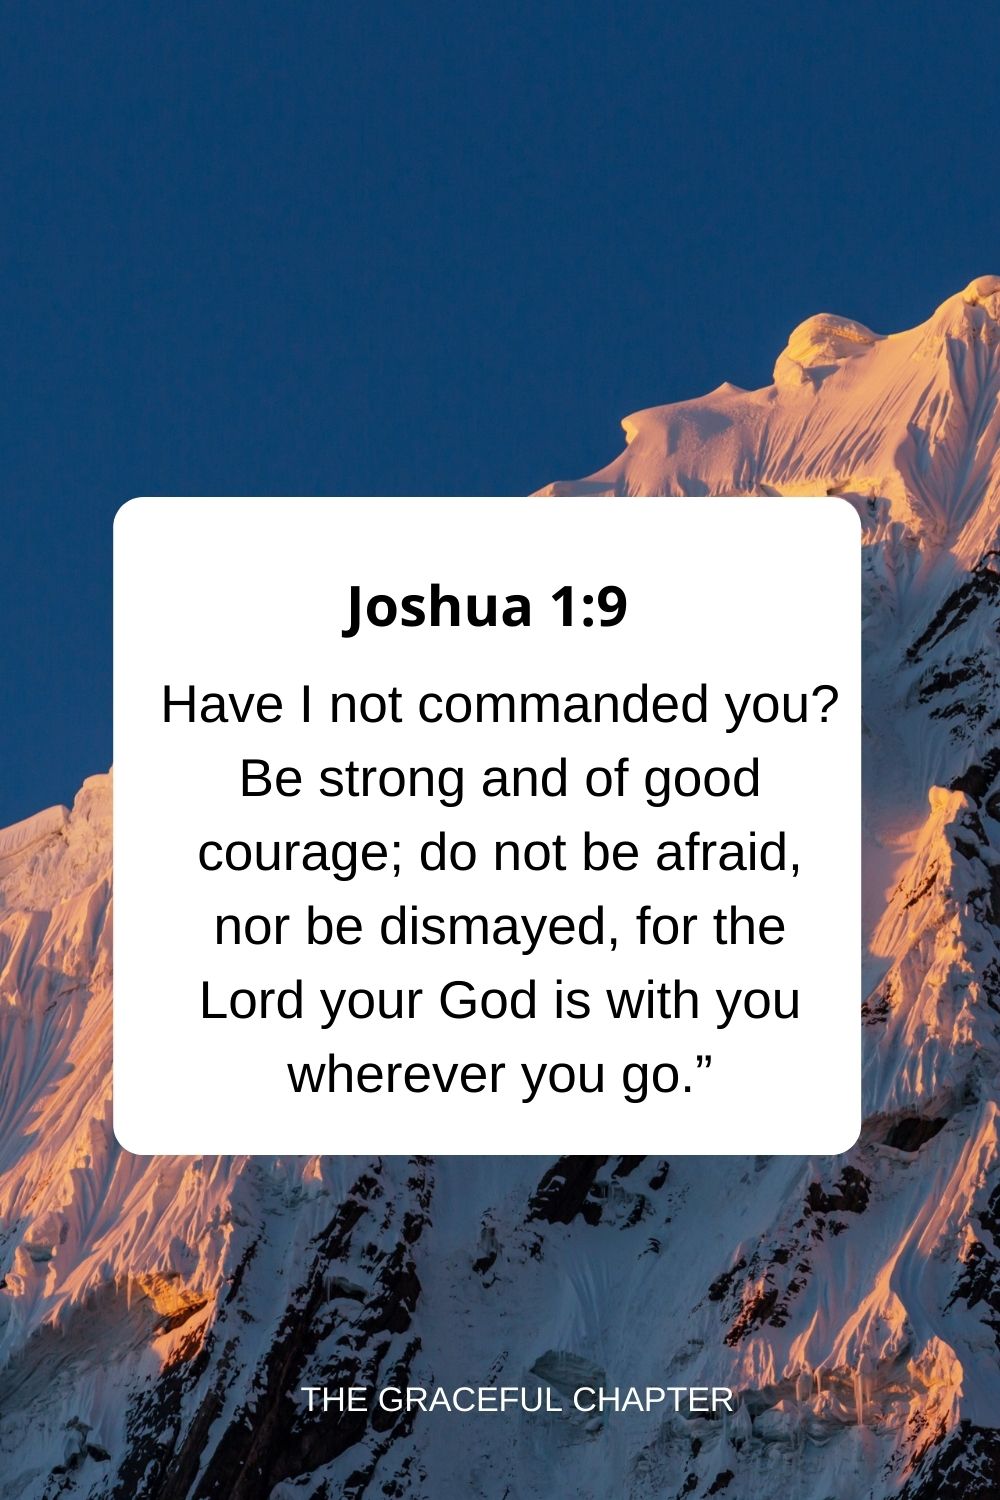 Have I not commanded you? Be strong and of good courage; do not be afraid, nor be dismayed, for the Lord your God is with you wherever you go.” Joshua 1:9